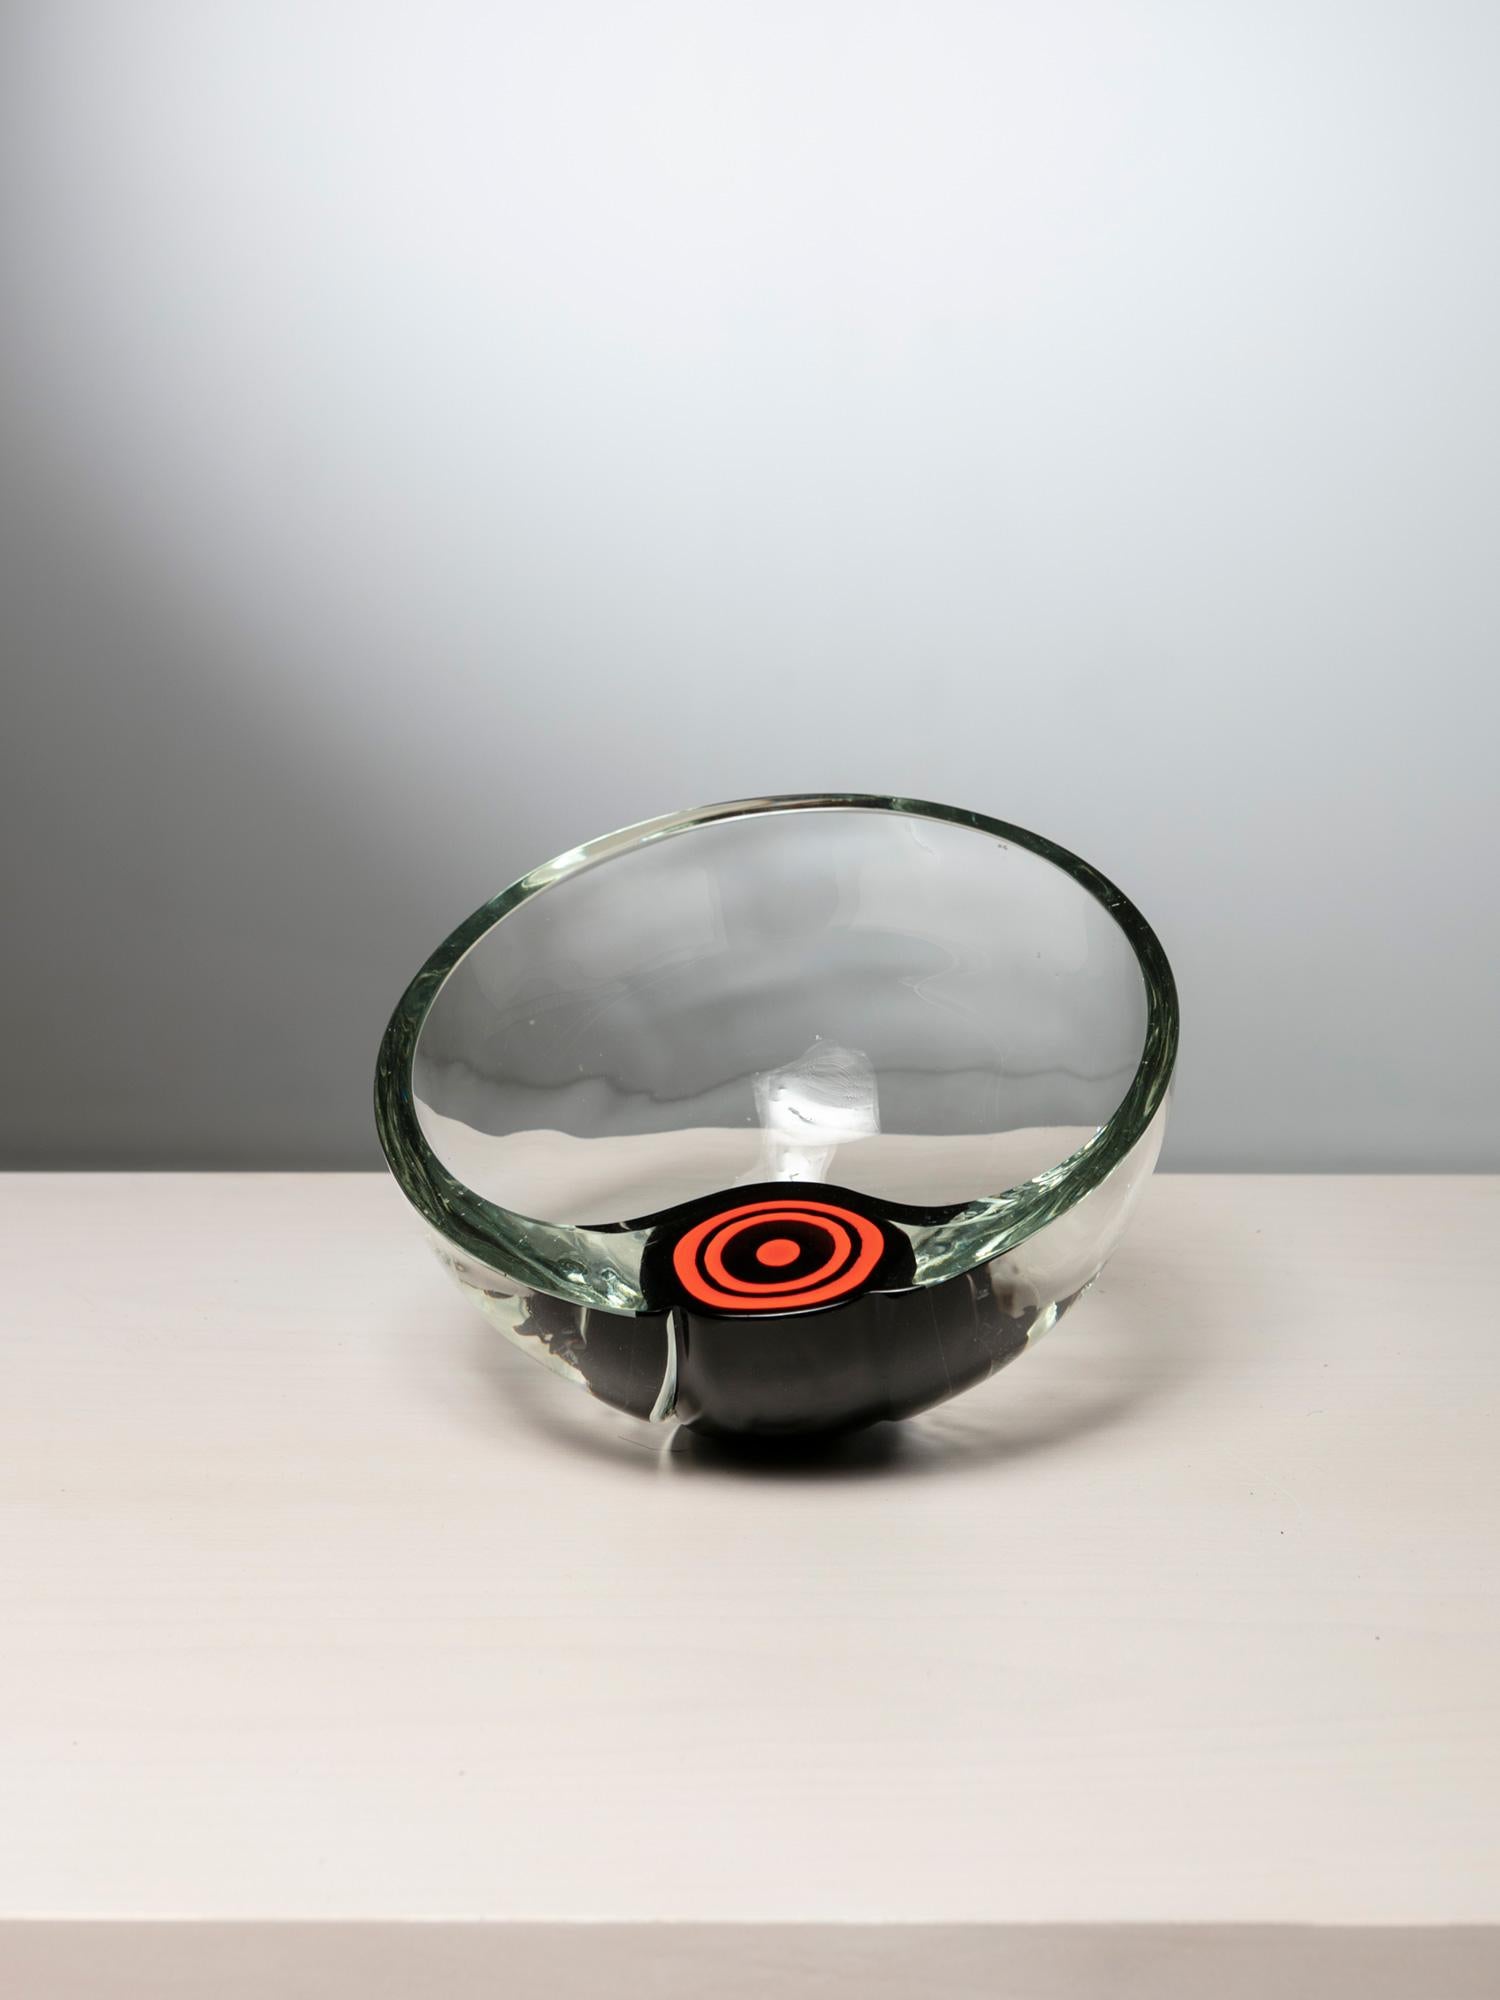 Italian 1970s Murano glass bowl/sculpture
Thick solid glass distribution allows the piece to stand in this serving position.